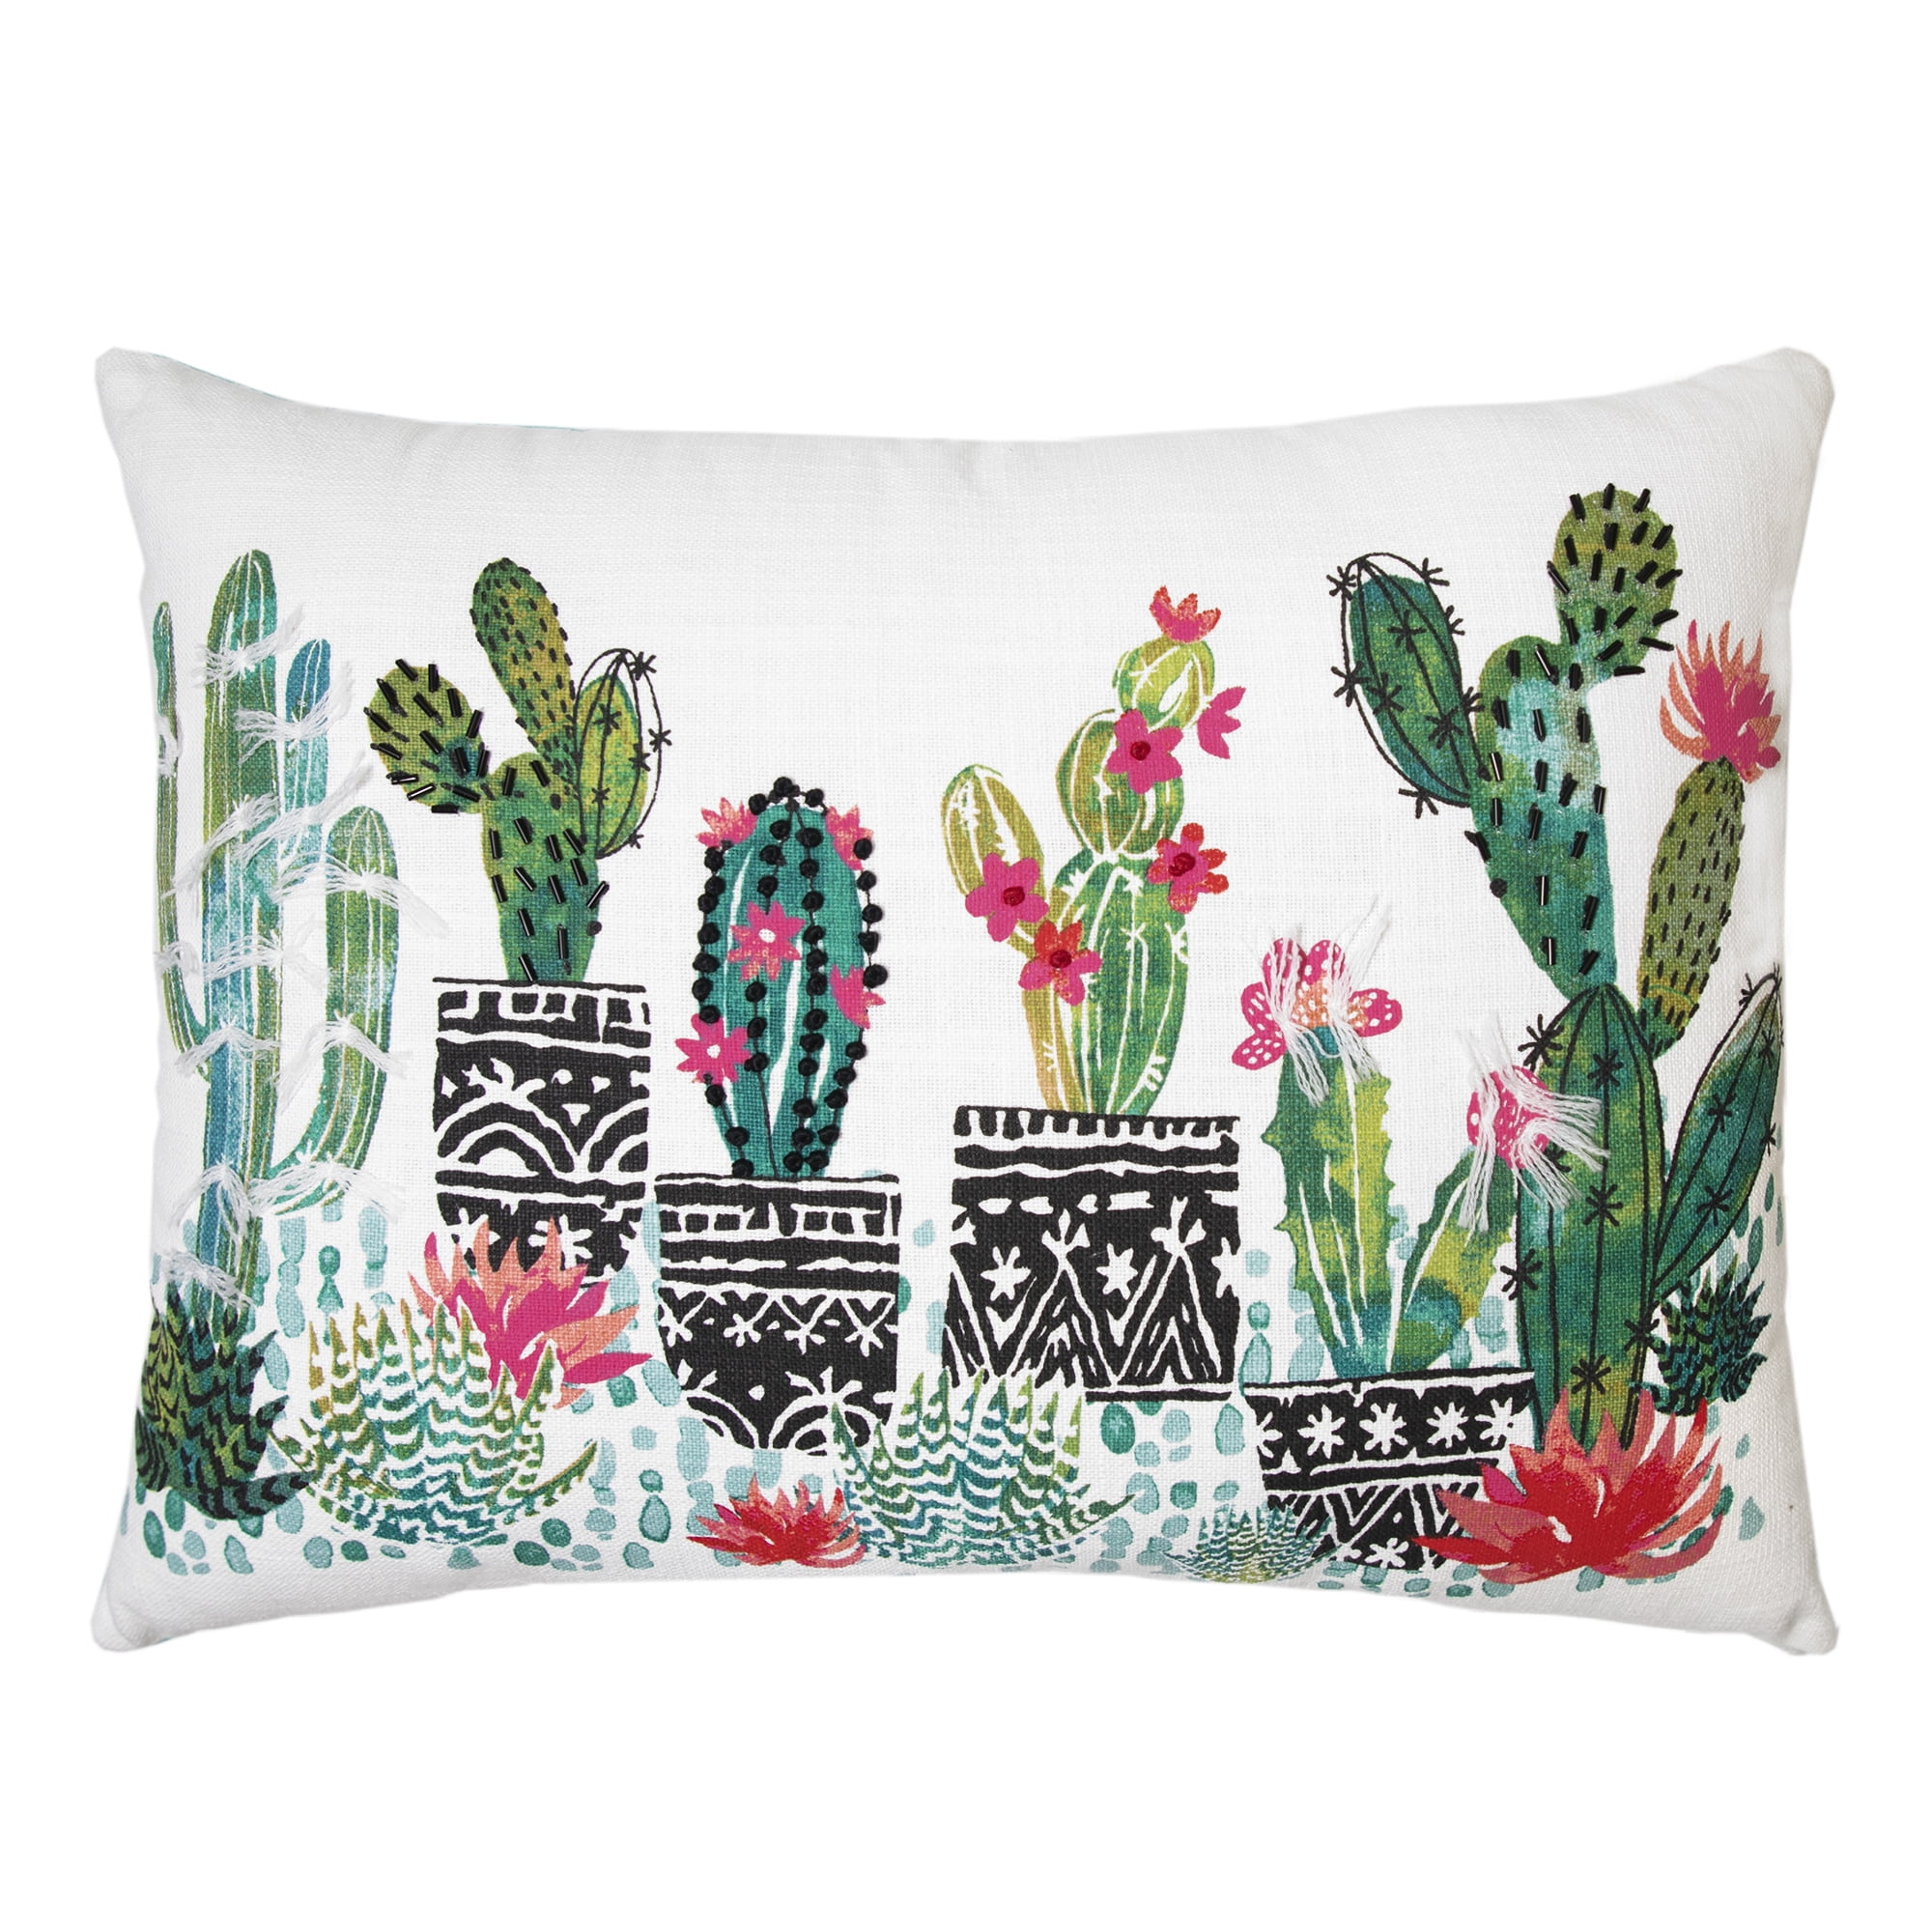 Moslion Cactus Pillows Decorative Throw Pillow Cover Cactus Flower Pillow Case 18x18 Inch Cotton Linen Square Cushion Cover for Sofa Bed Green 